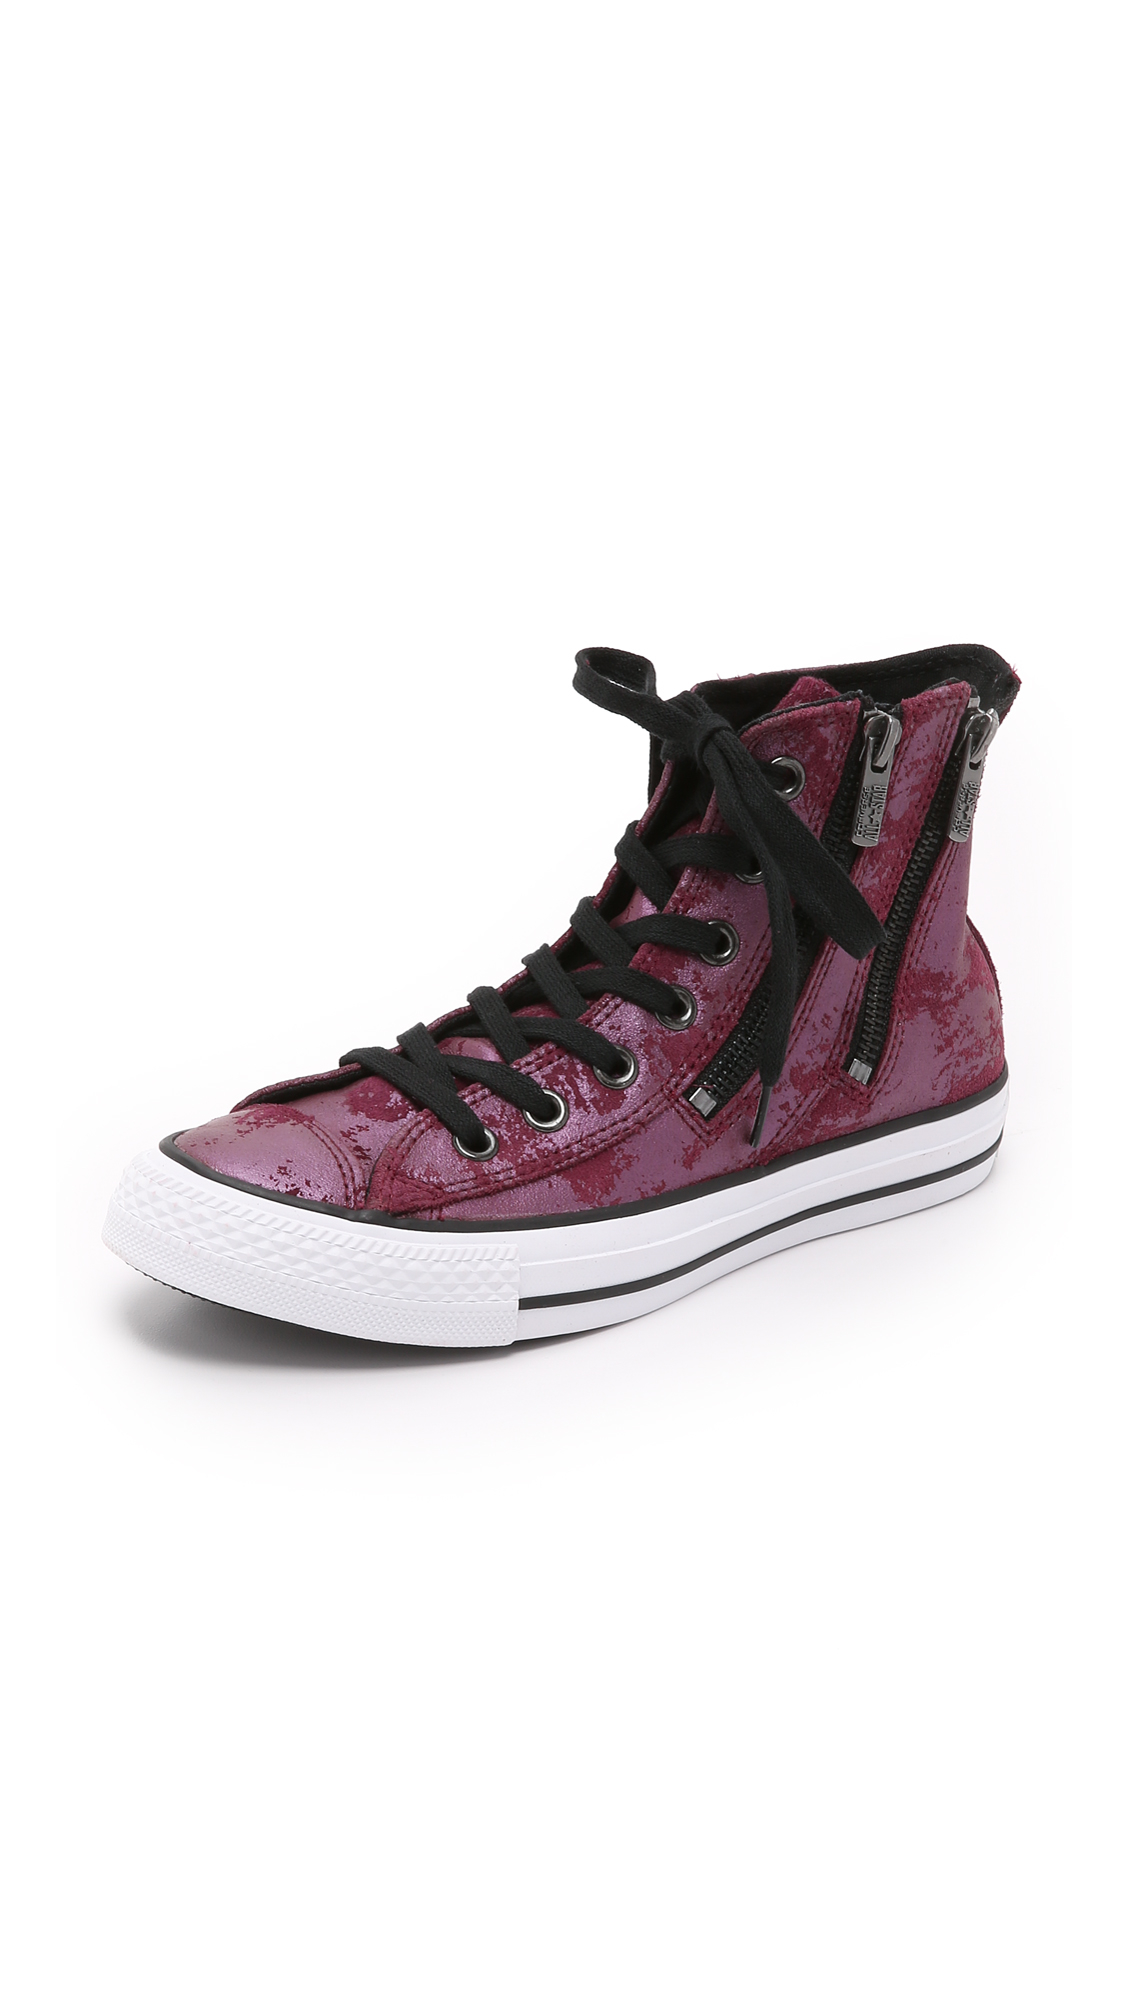 Converse Chuck Taylor All Star Dual Zip High Top Sneakers - Deep Bordeaux/black  in Purple | Lyst Canada